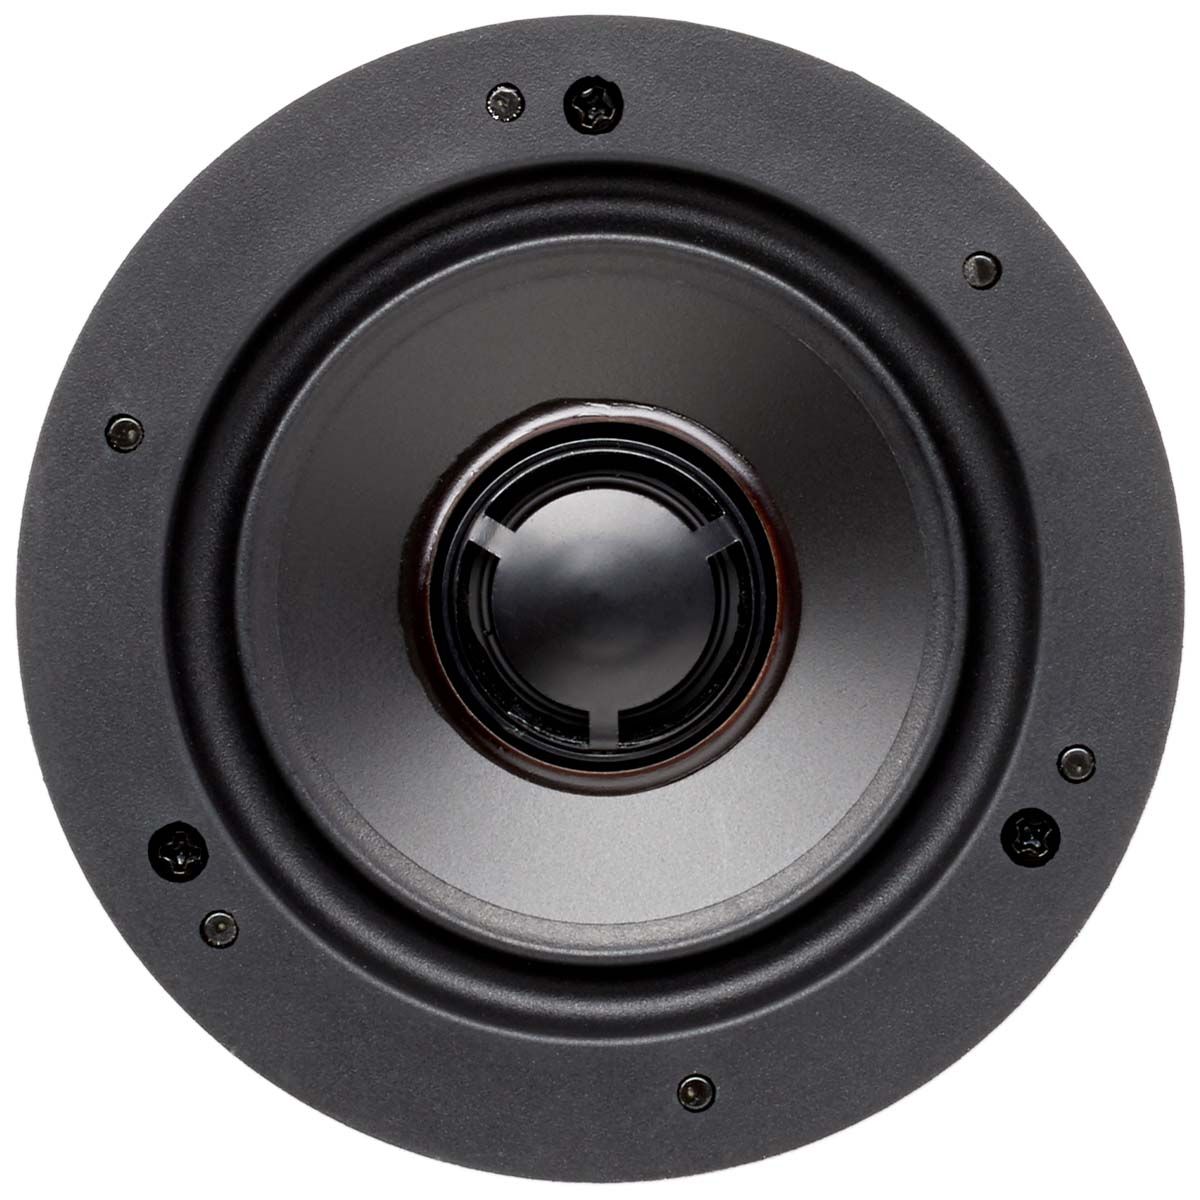 MartinLogan IC3 Small Opening In-Ceiling Speaker front view on white background